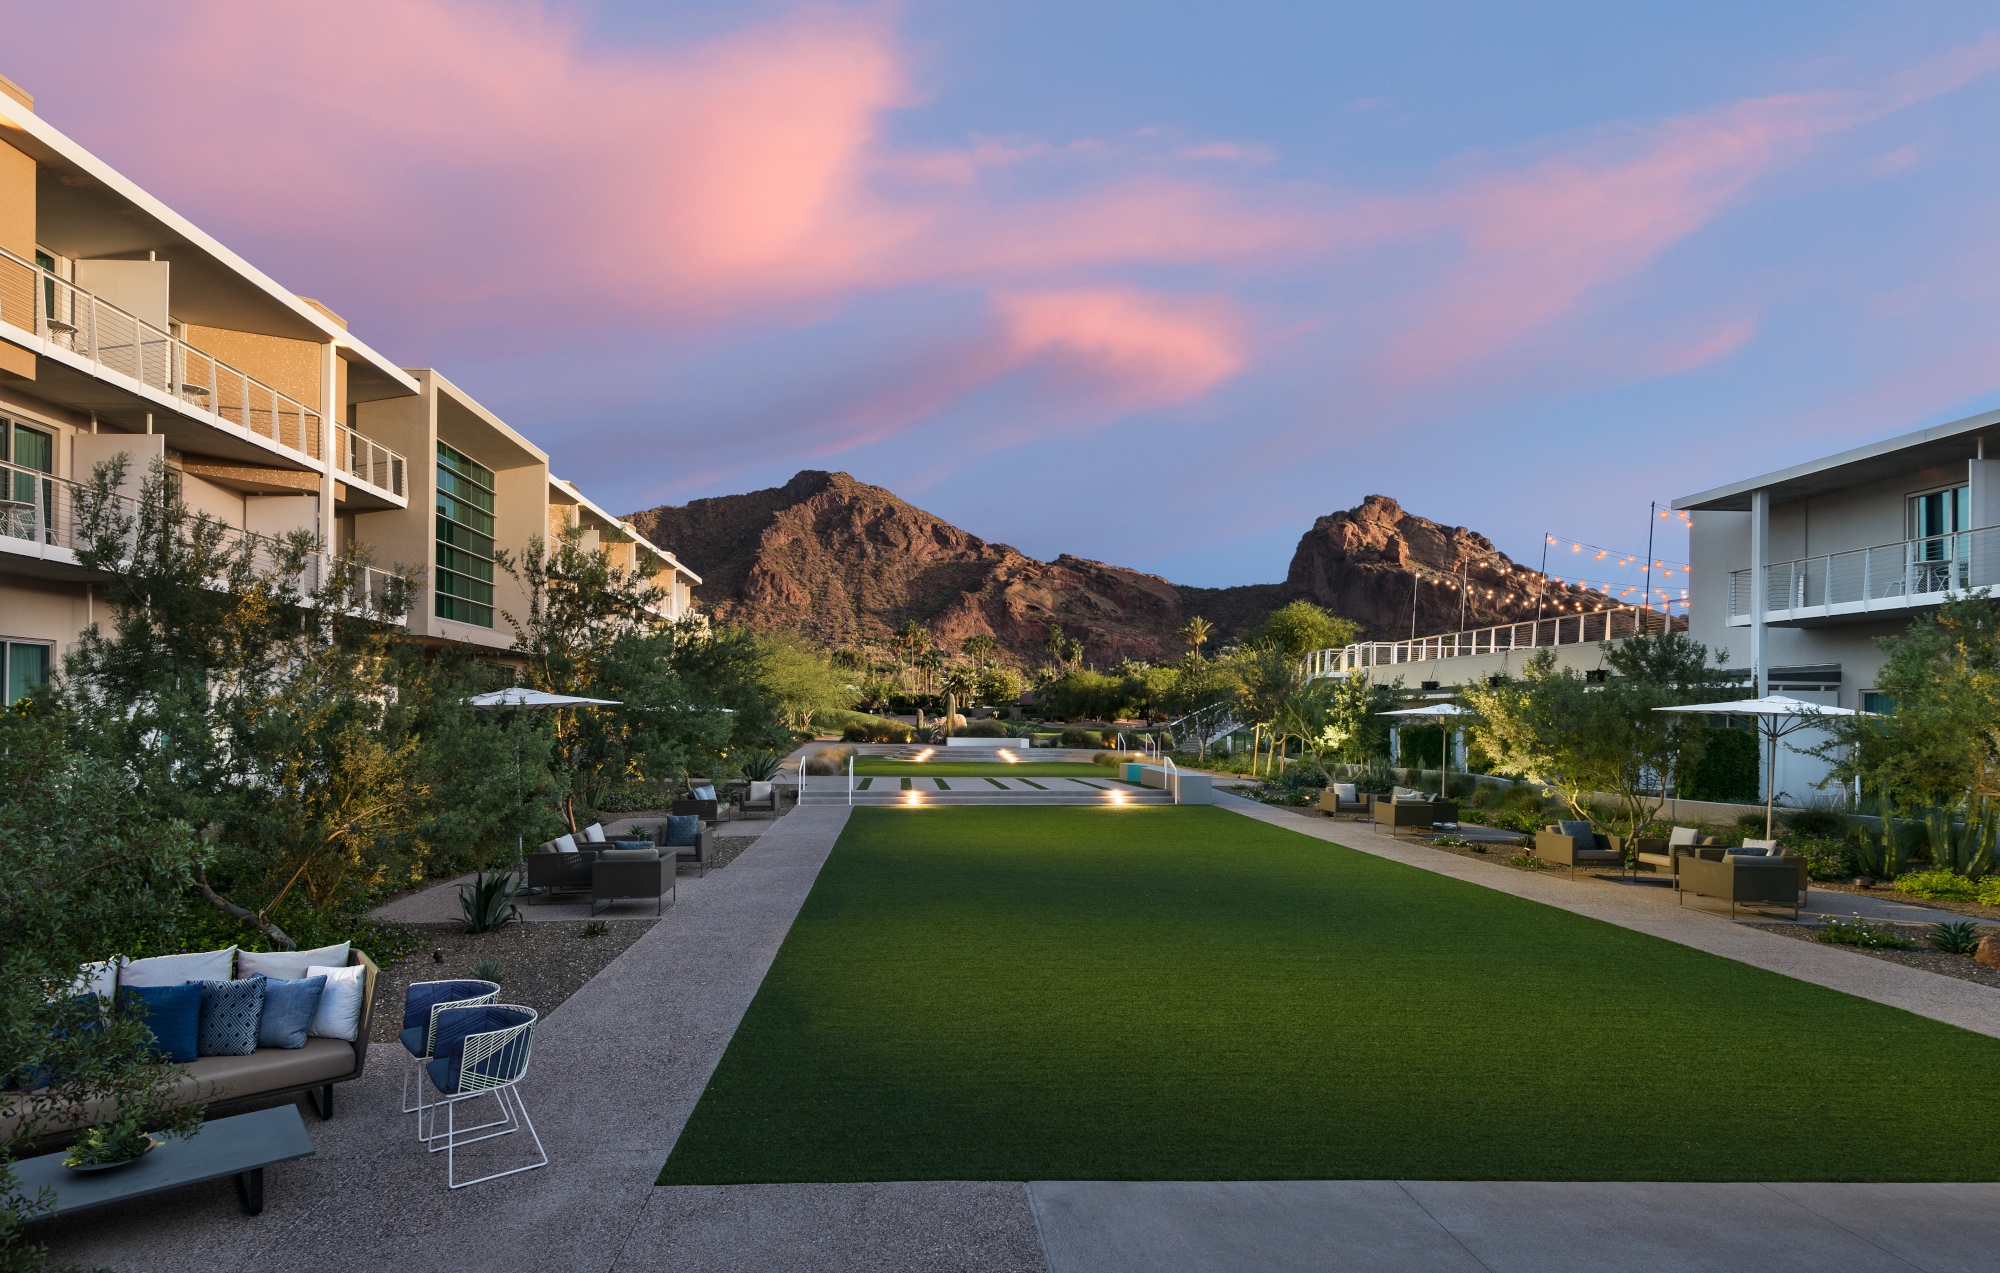 Guestrooms & Camelback Mountain View at the Mountain Shadows Resort Scottsdale Guestrooms & Camelback Mountain View